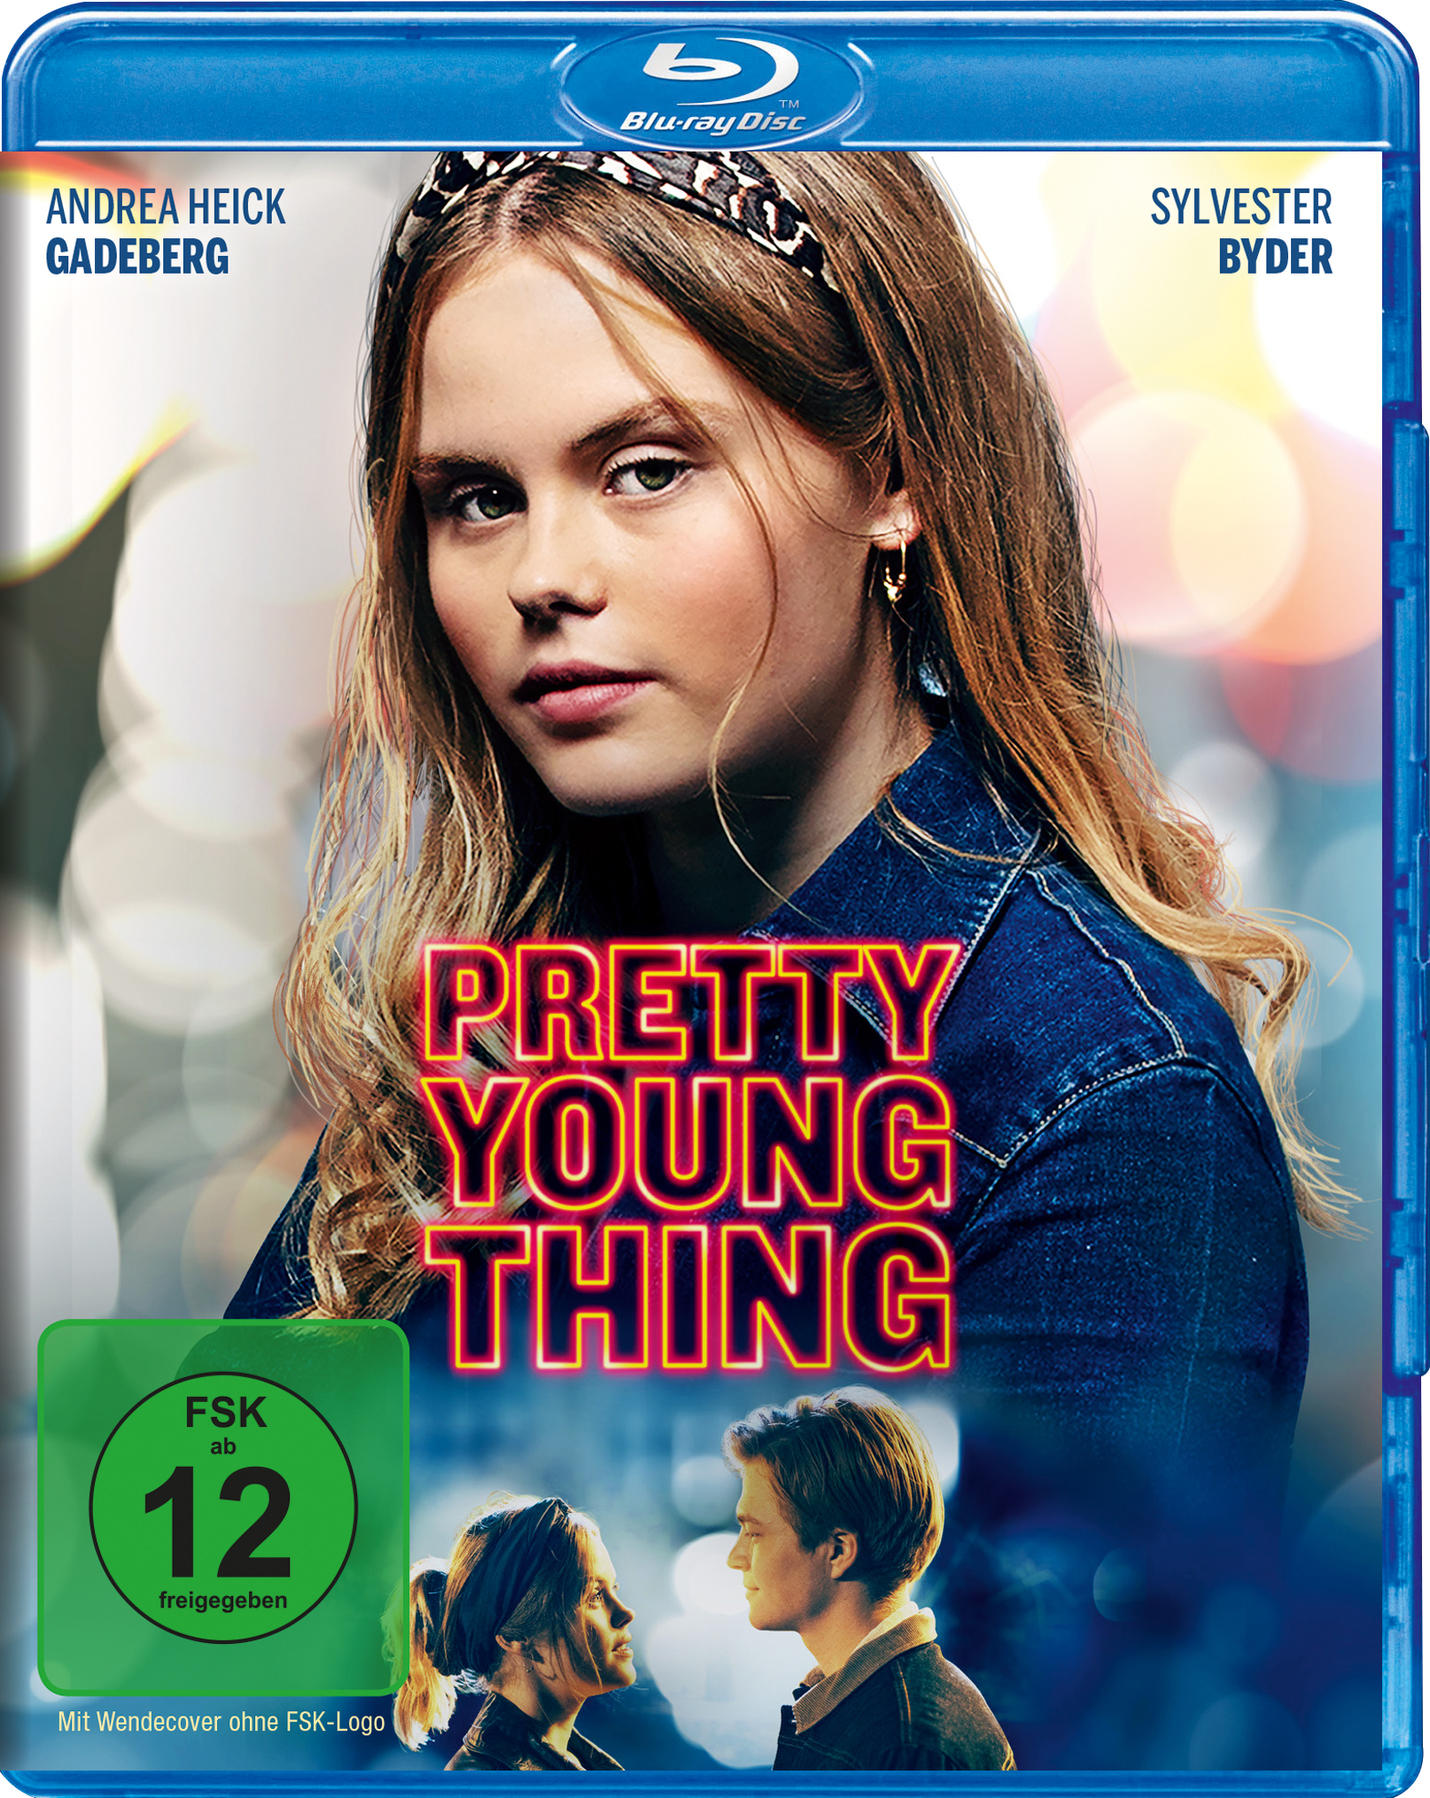 Thing Young Blu-ray Pretty